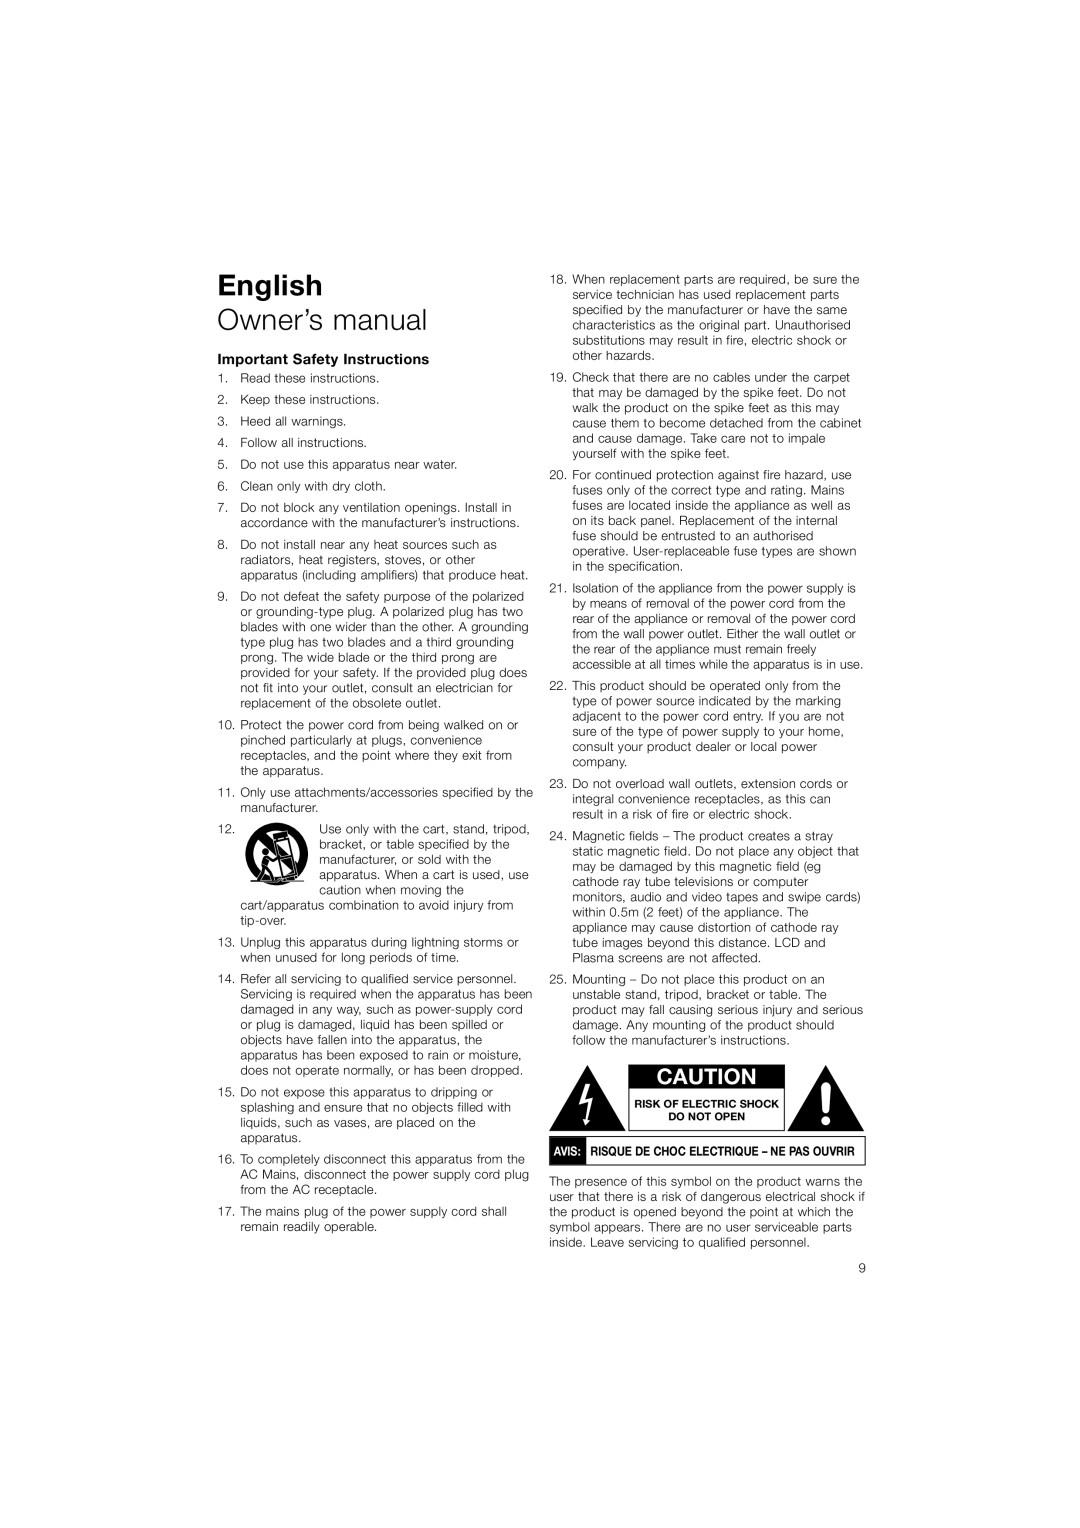 Bowers & Wilkins ASW608, ASW610XP owner manual English, Owner’s manual, Important Safety Instructions 